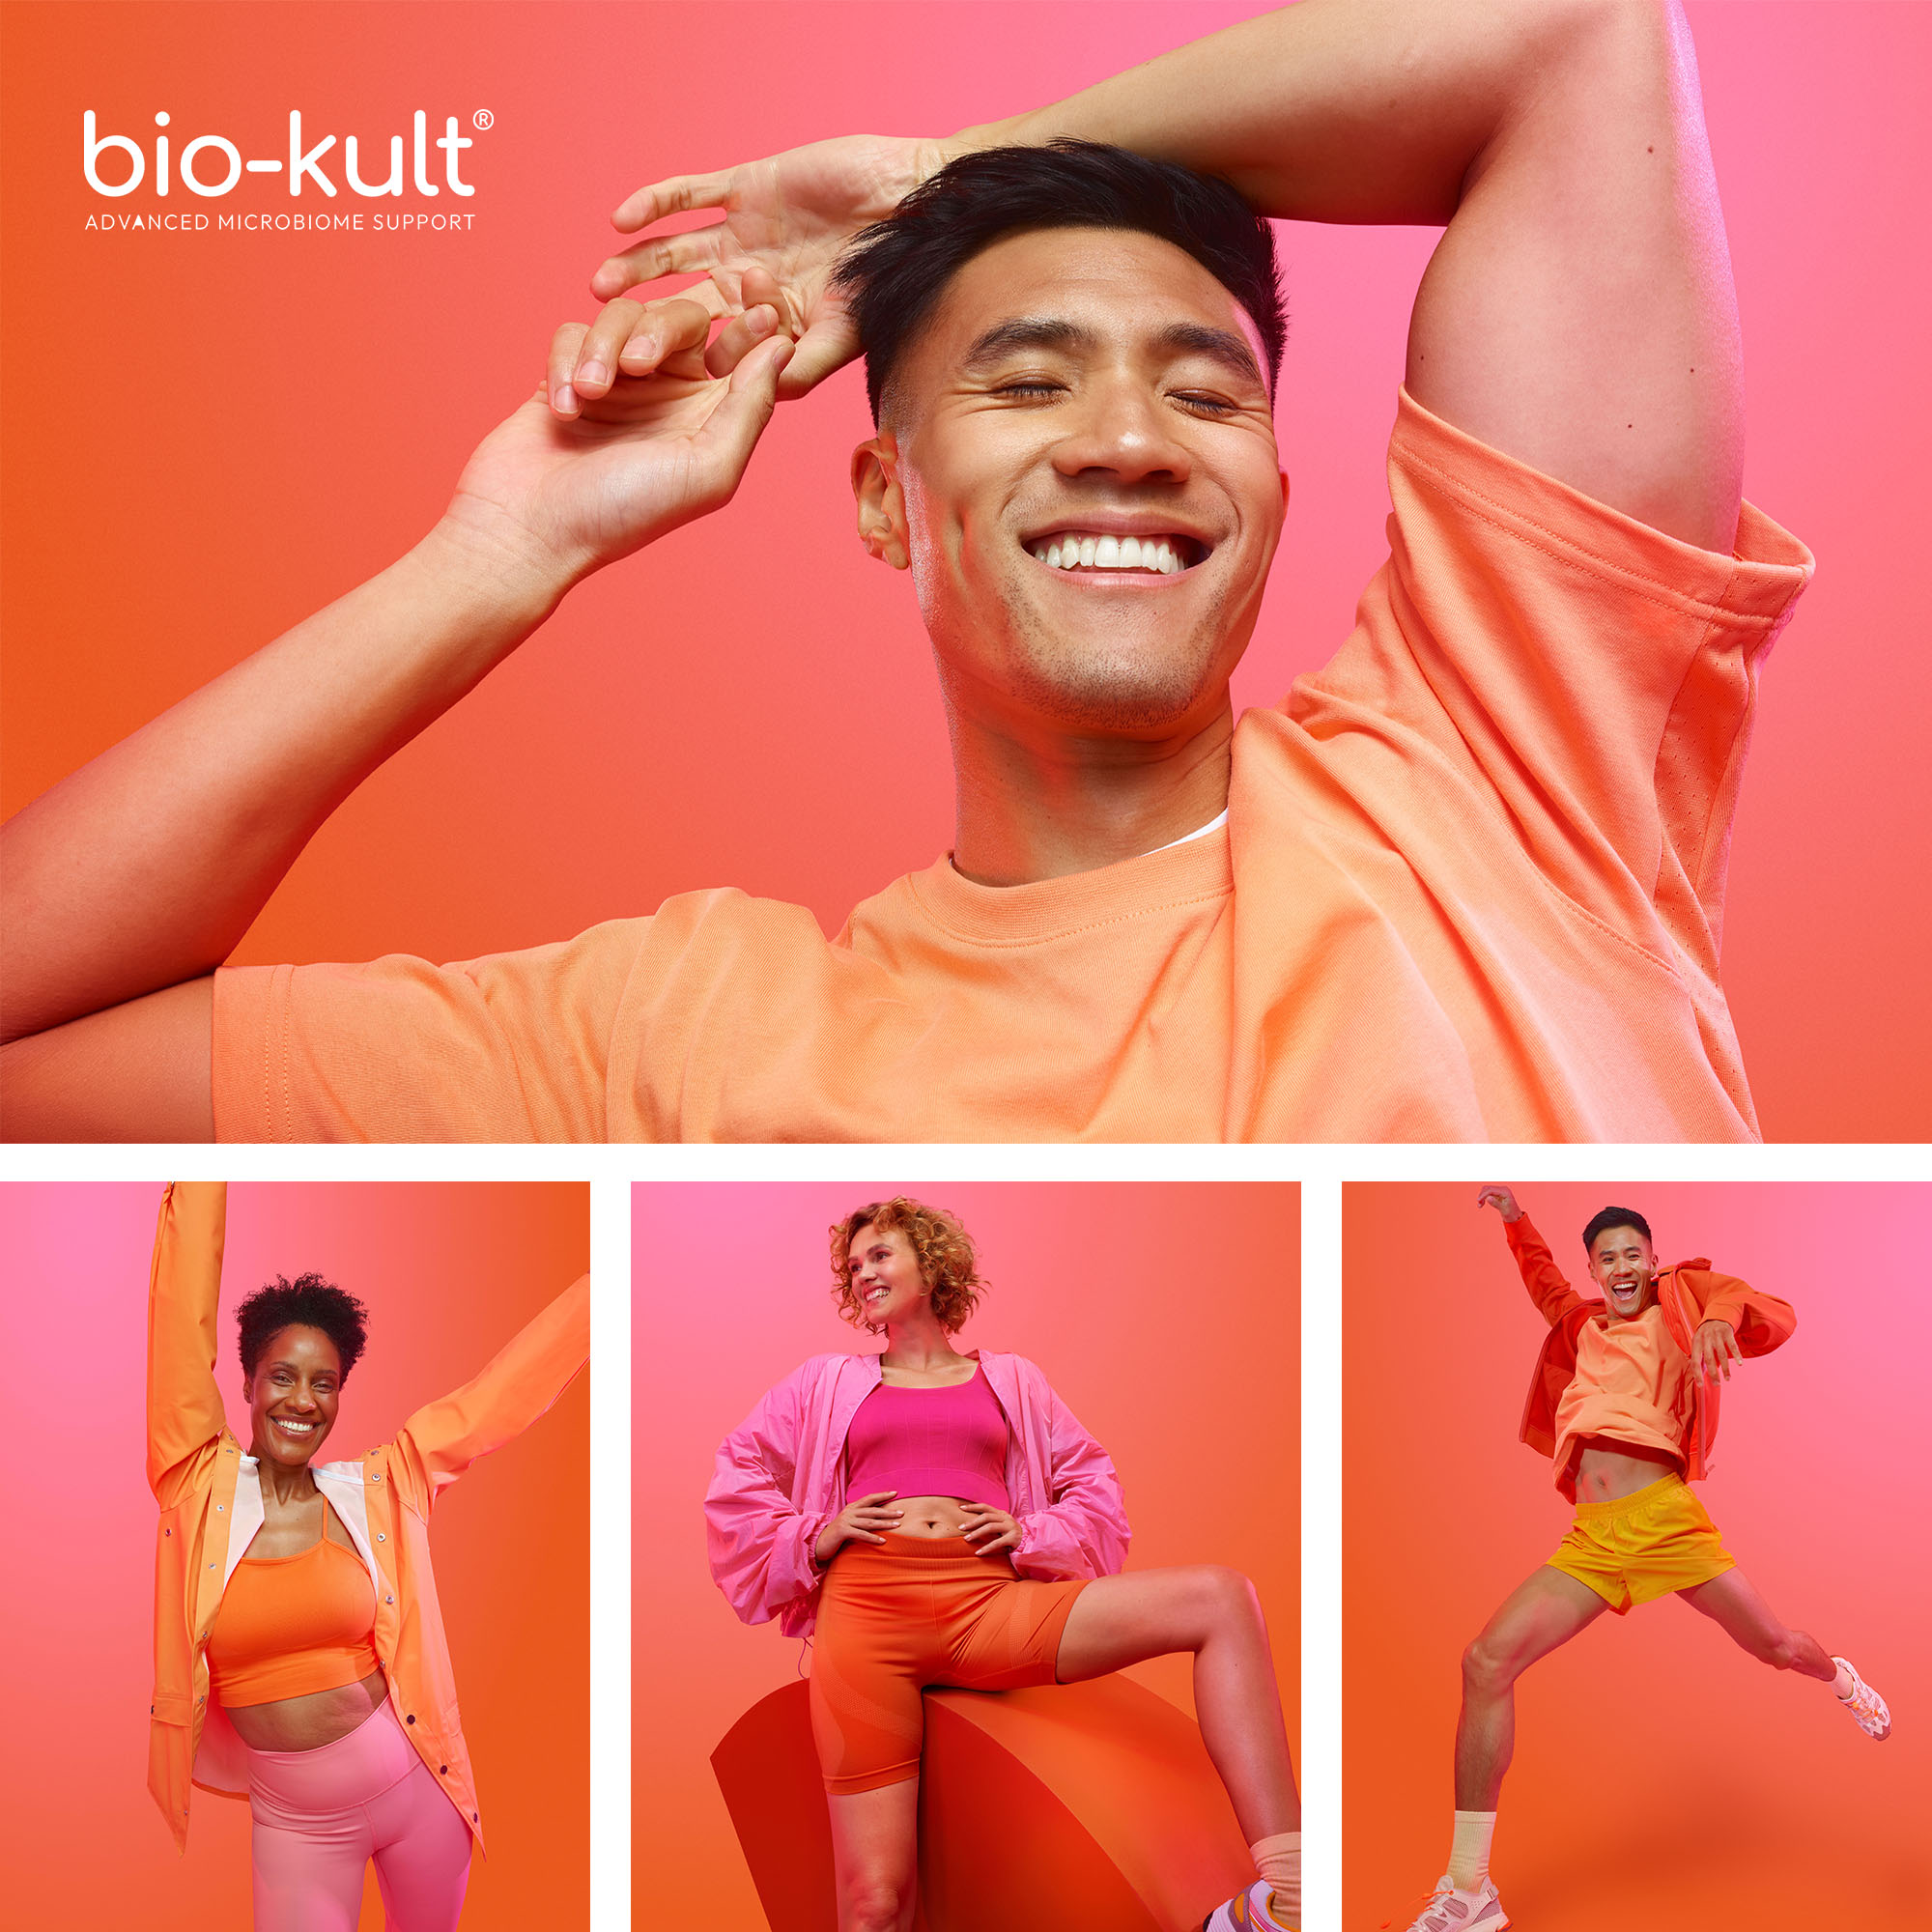 Image featuring models Marie, Donald, and Chloe from Sandra Reynolds agency for Bio-Kult